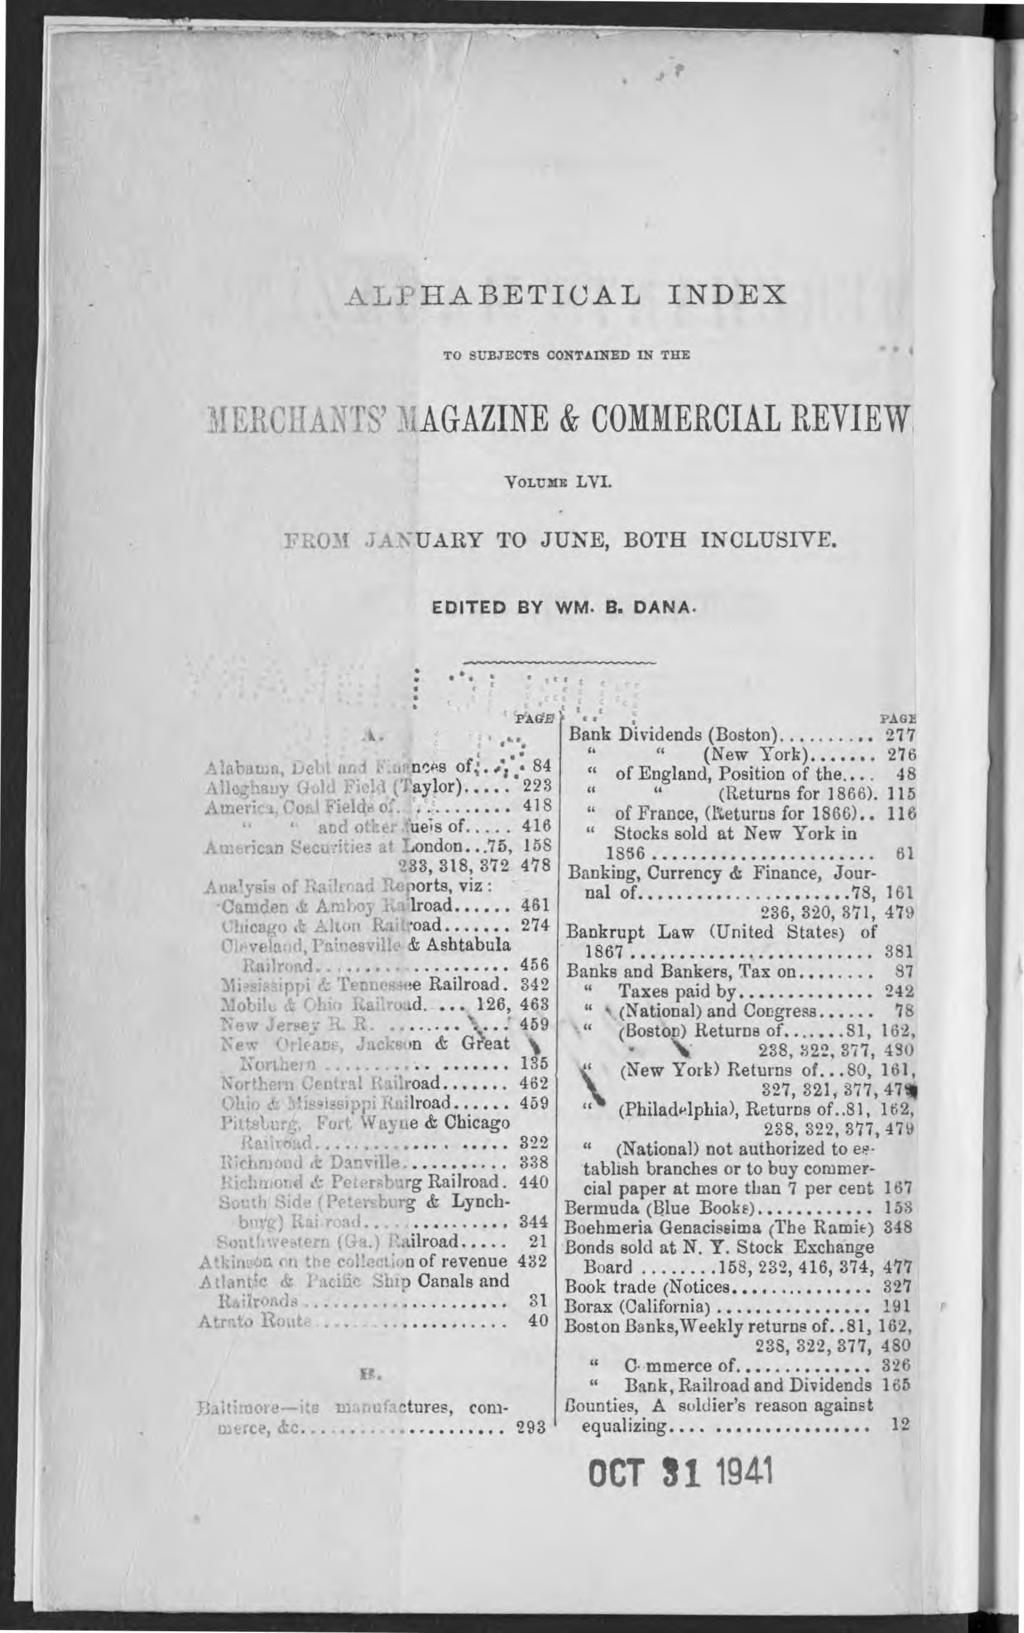 ALPHABETICAL INDEX TO SUBJECTS CONTAINED IN THE MERCHANTS? MAGAZINE & COMMERCIAL REVIEW V o l u m e L V L F R O M J A N U A R Y TO J U N E, B O TH IN C L U S IV E. EDITED BY WM- B. DANA. A. ;.